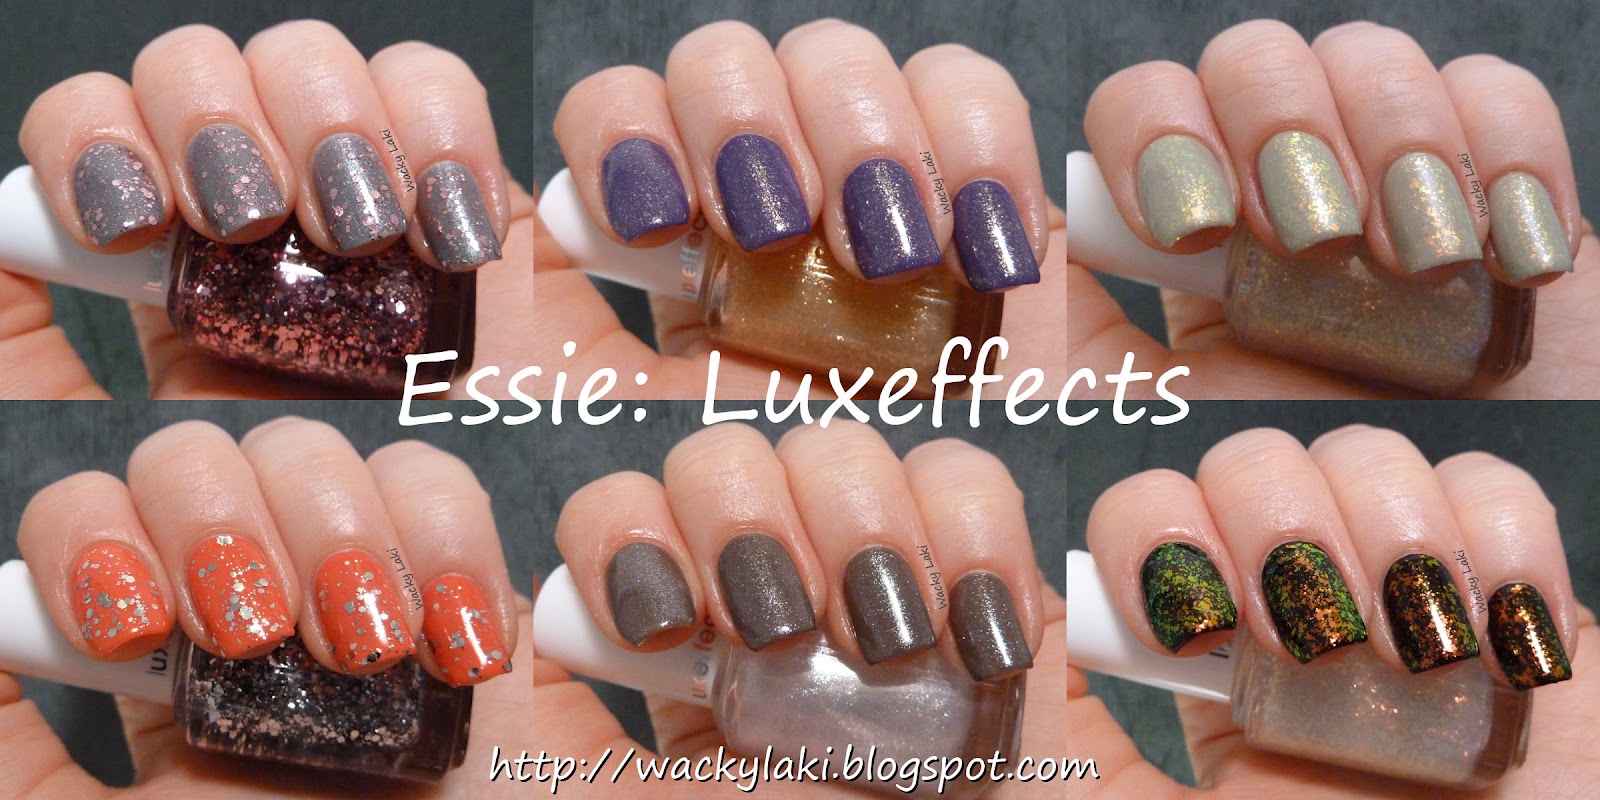 Essie Collection Luxeffects Laki: Wacky